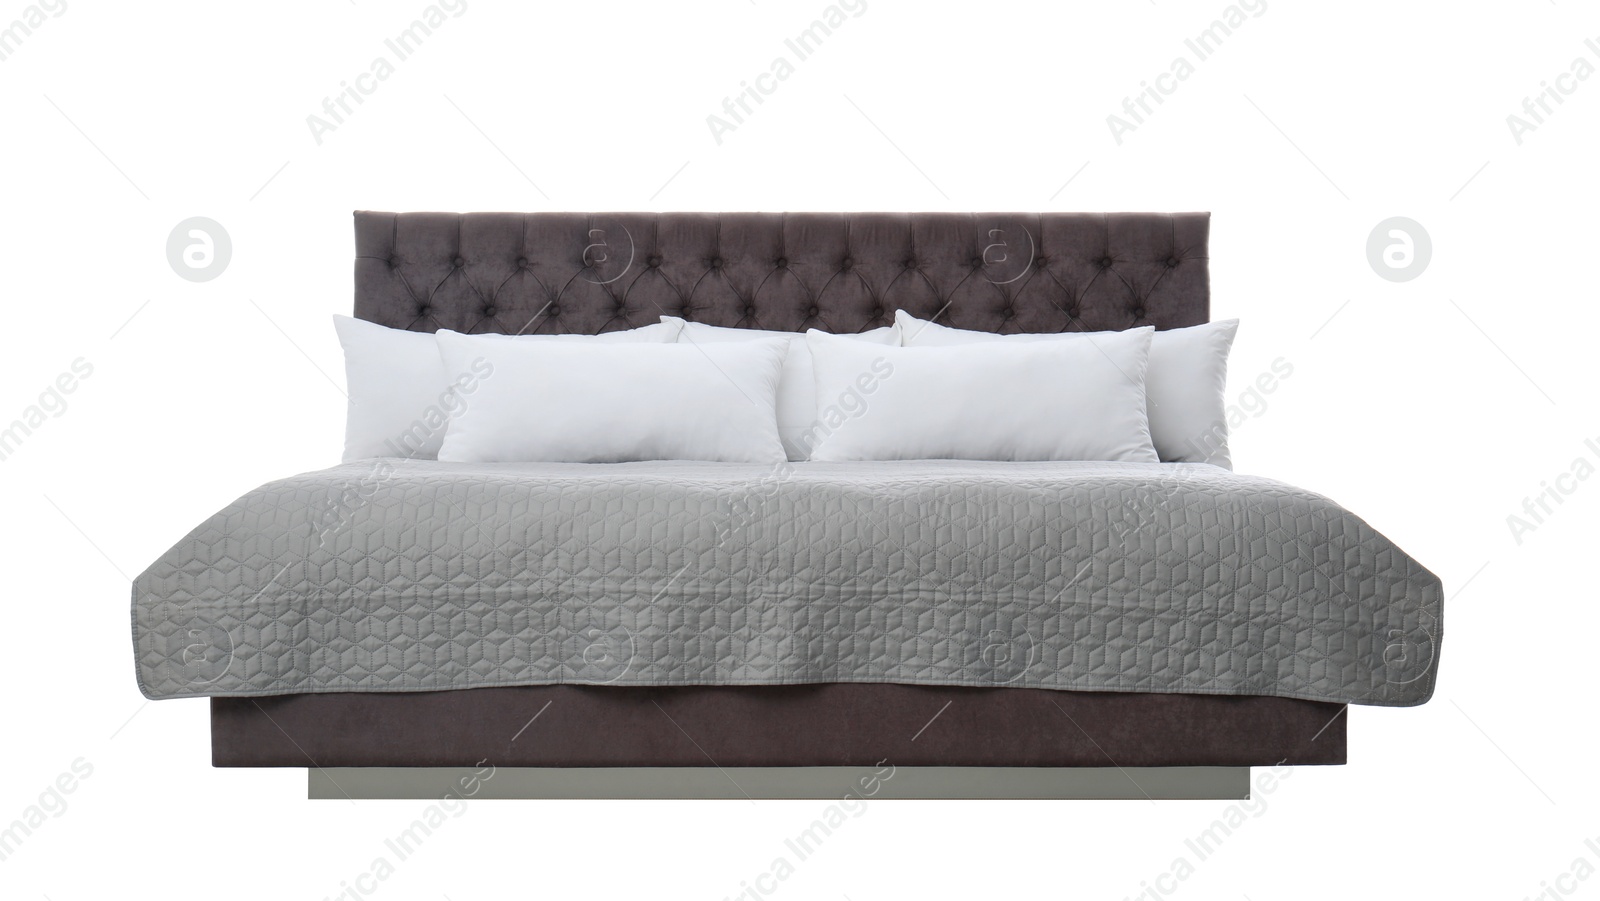 Photo of Comfortable bed on white background. Idea for interior design